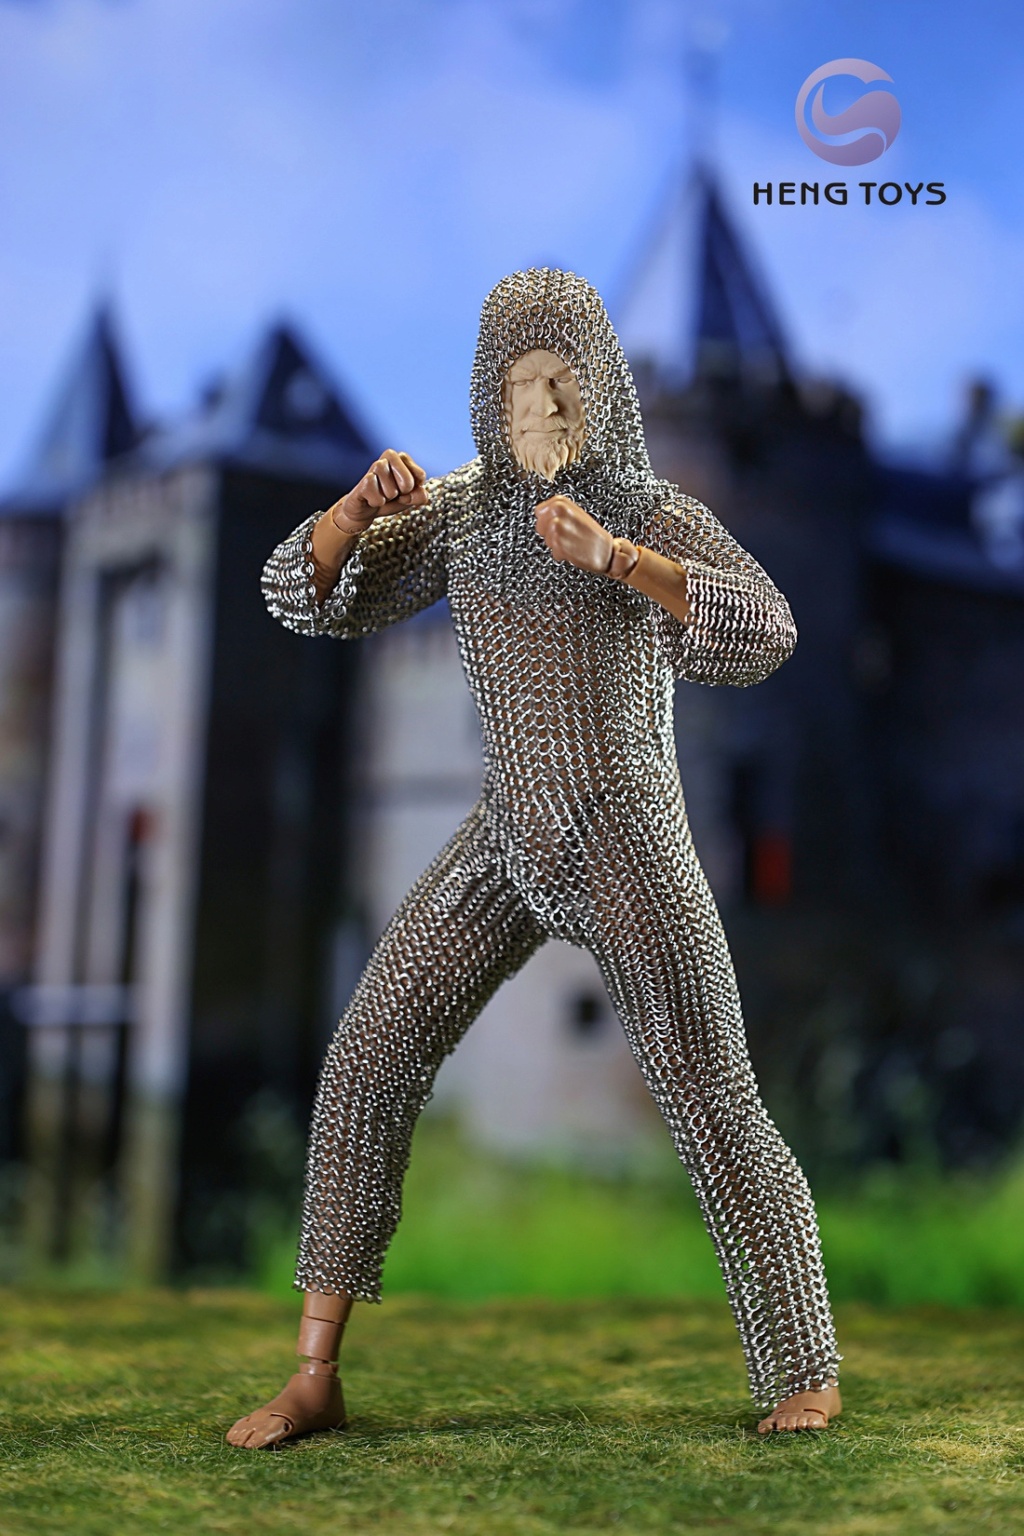 HengToys - NEW PRODUCT: HENG TOYS: 1/6 stainless steel chain mail (diameter 3.8mm) [male/female] Fbe75610